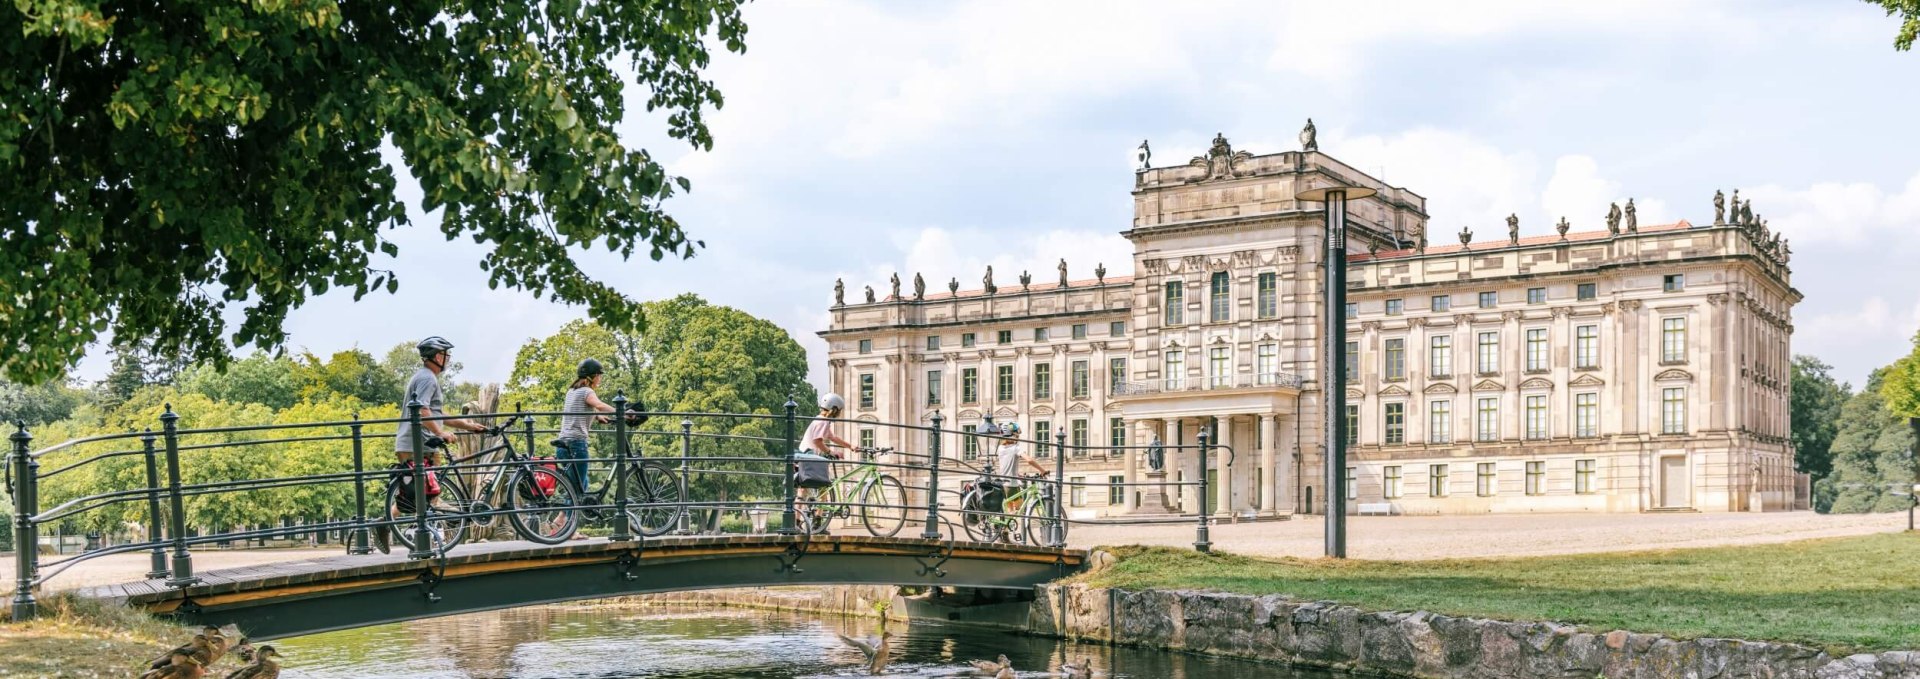 "Versailles of the East" and "Sanssouci of the North": Ludwigslust Palace is an absolute highlight of the tour., © TMV/Tiemann